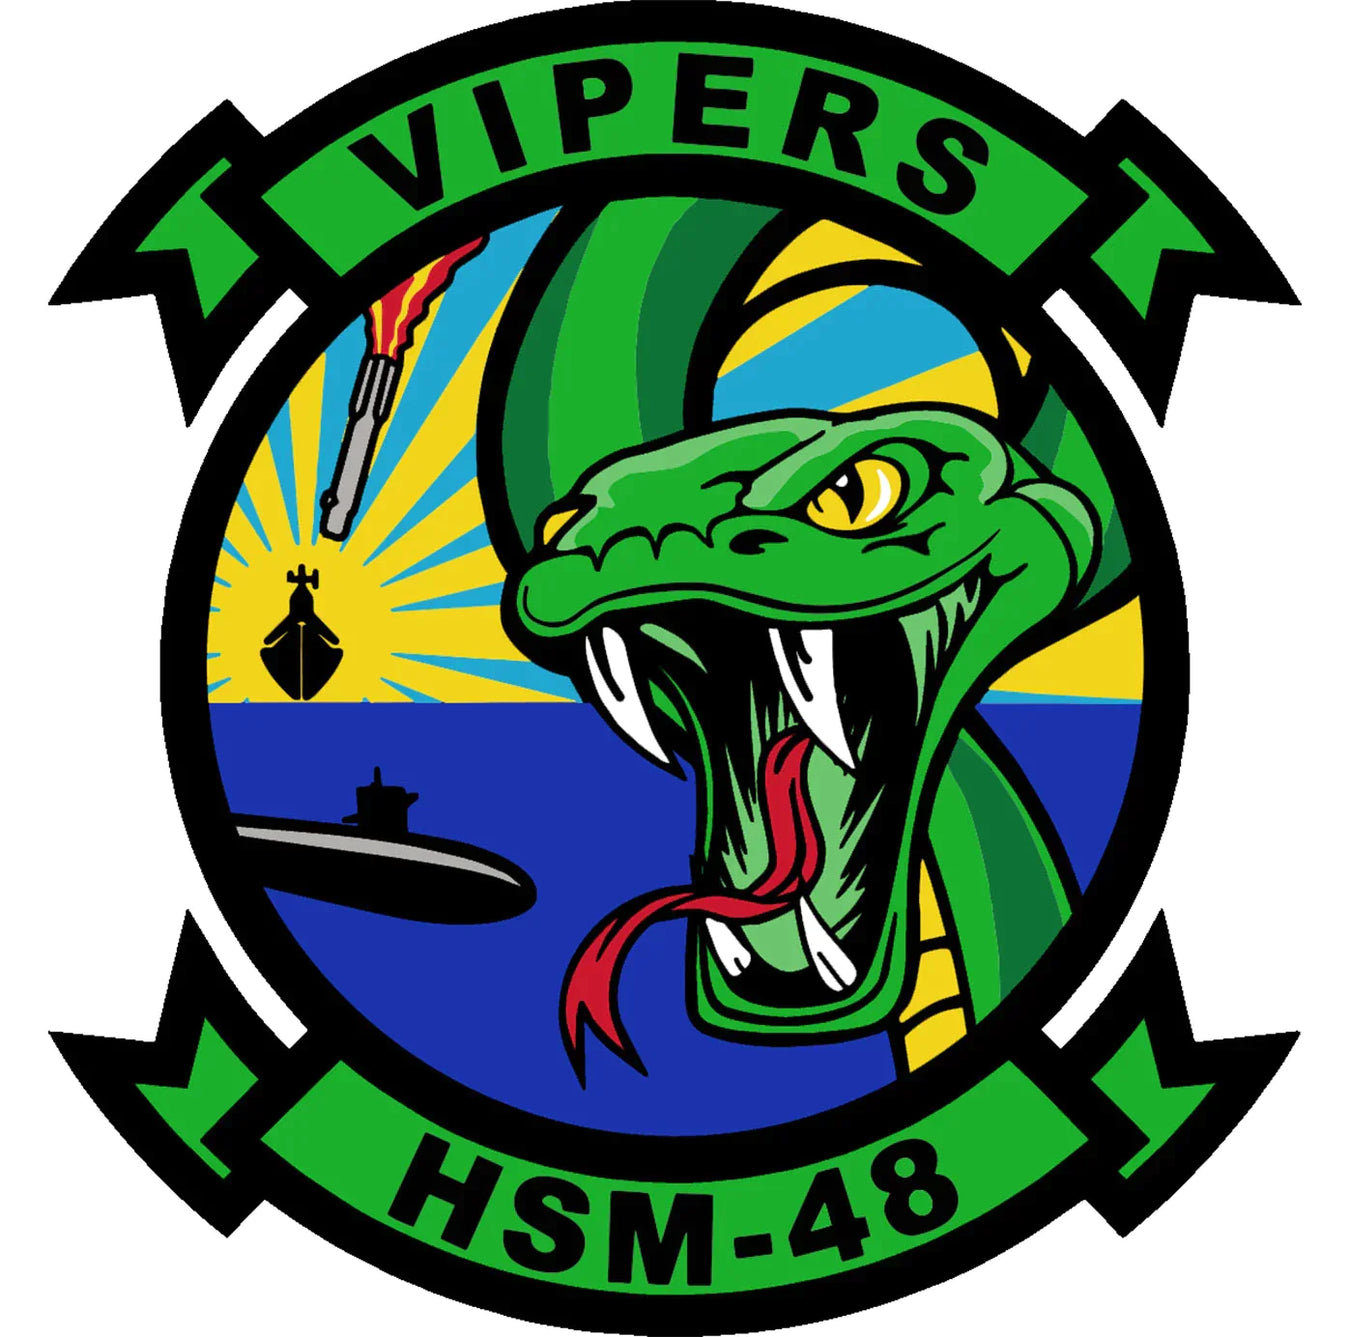 Helicopter Maritime Strike Squadron 48 (HSM-48) "Vipers"